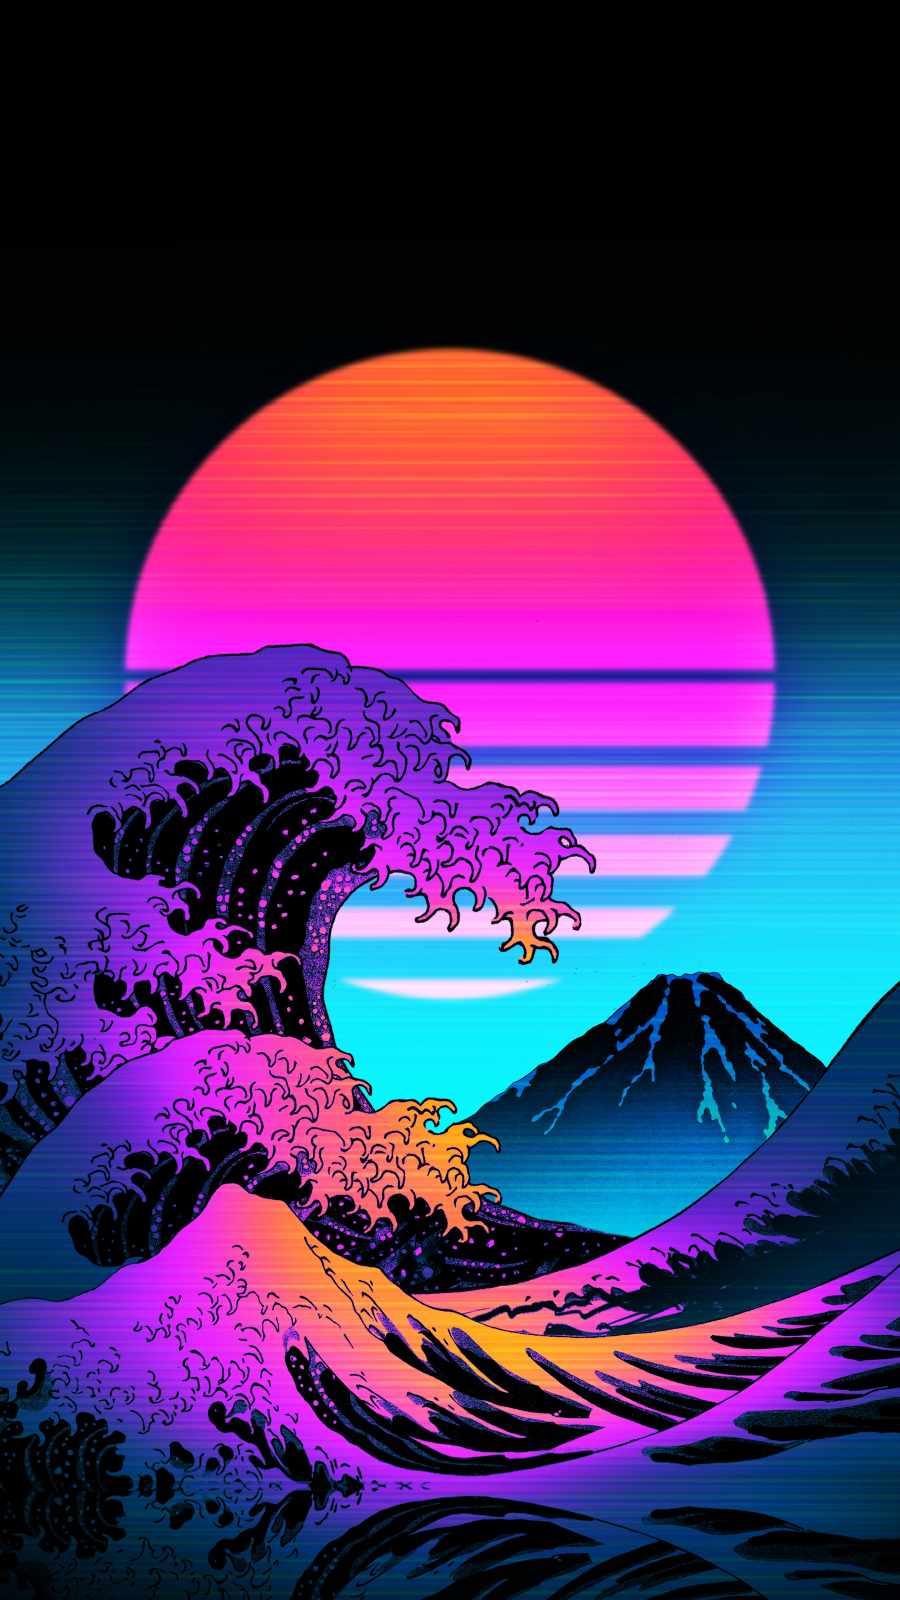 Retro Waves IPhone Wallpaper - IPhone Wallpapers : iPhone Wallpapers